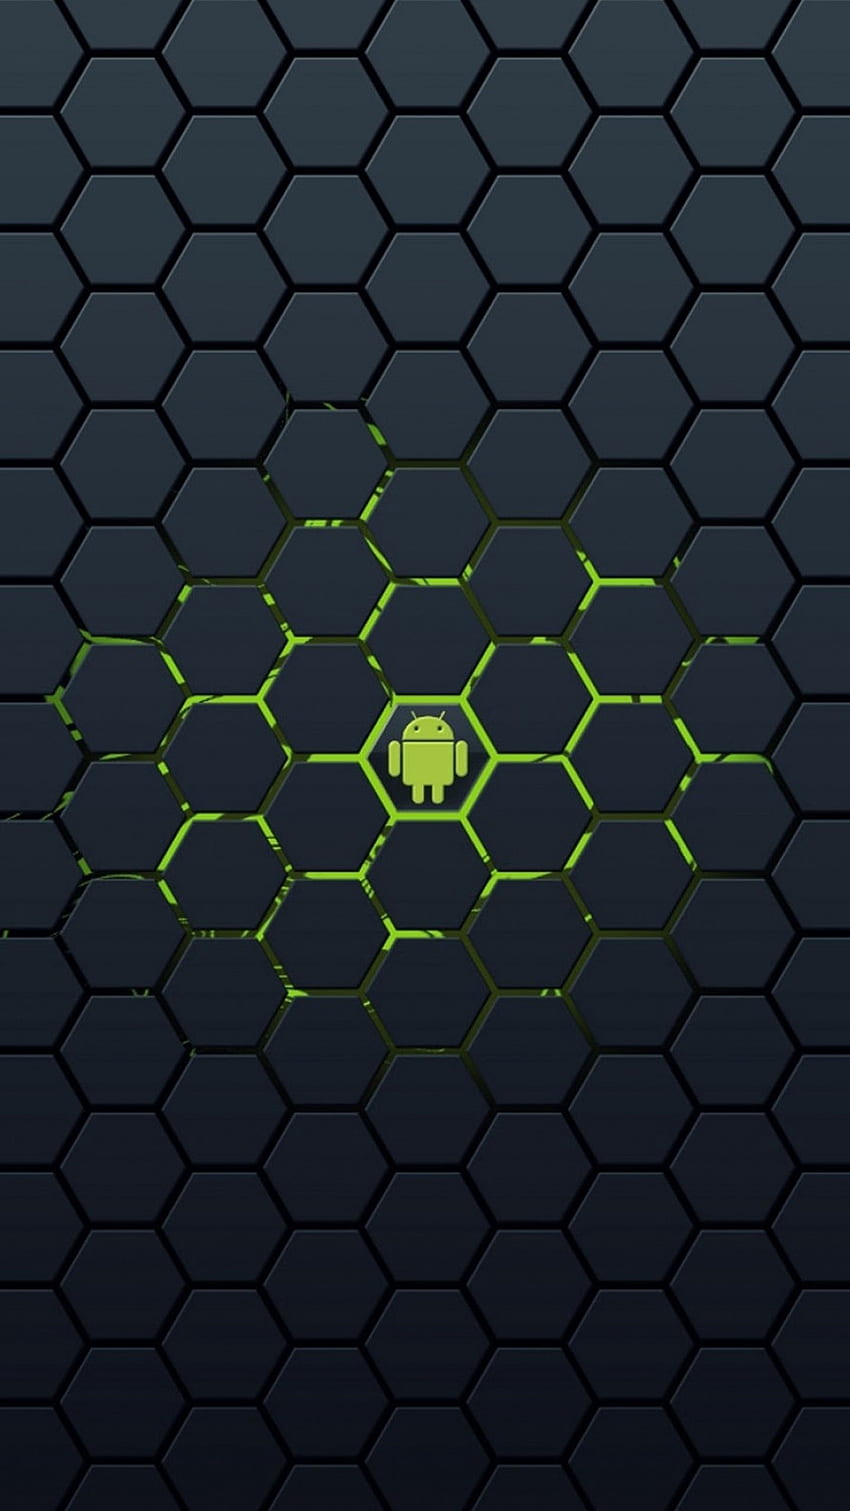 Blackberry Priv : Fills the grid Android HD phone wallpaper